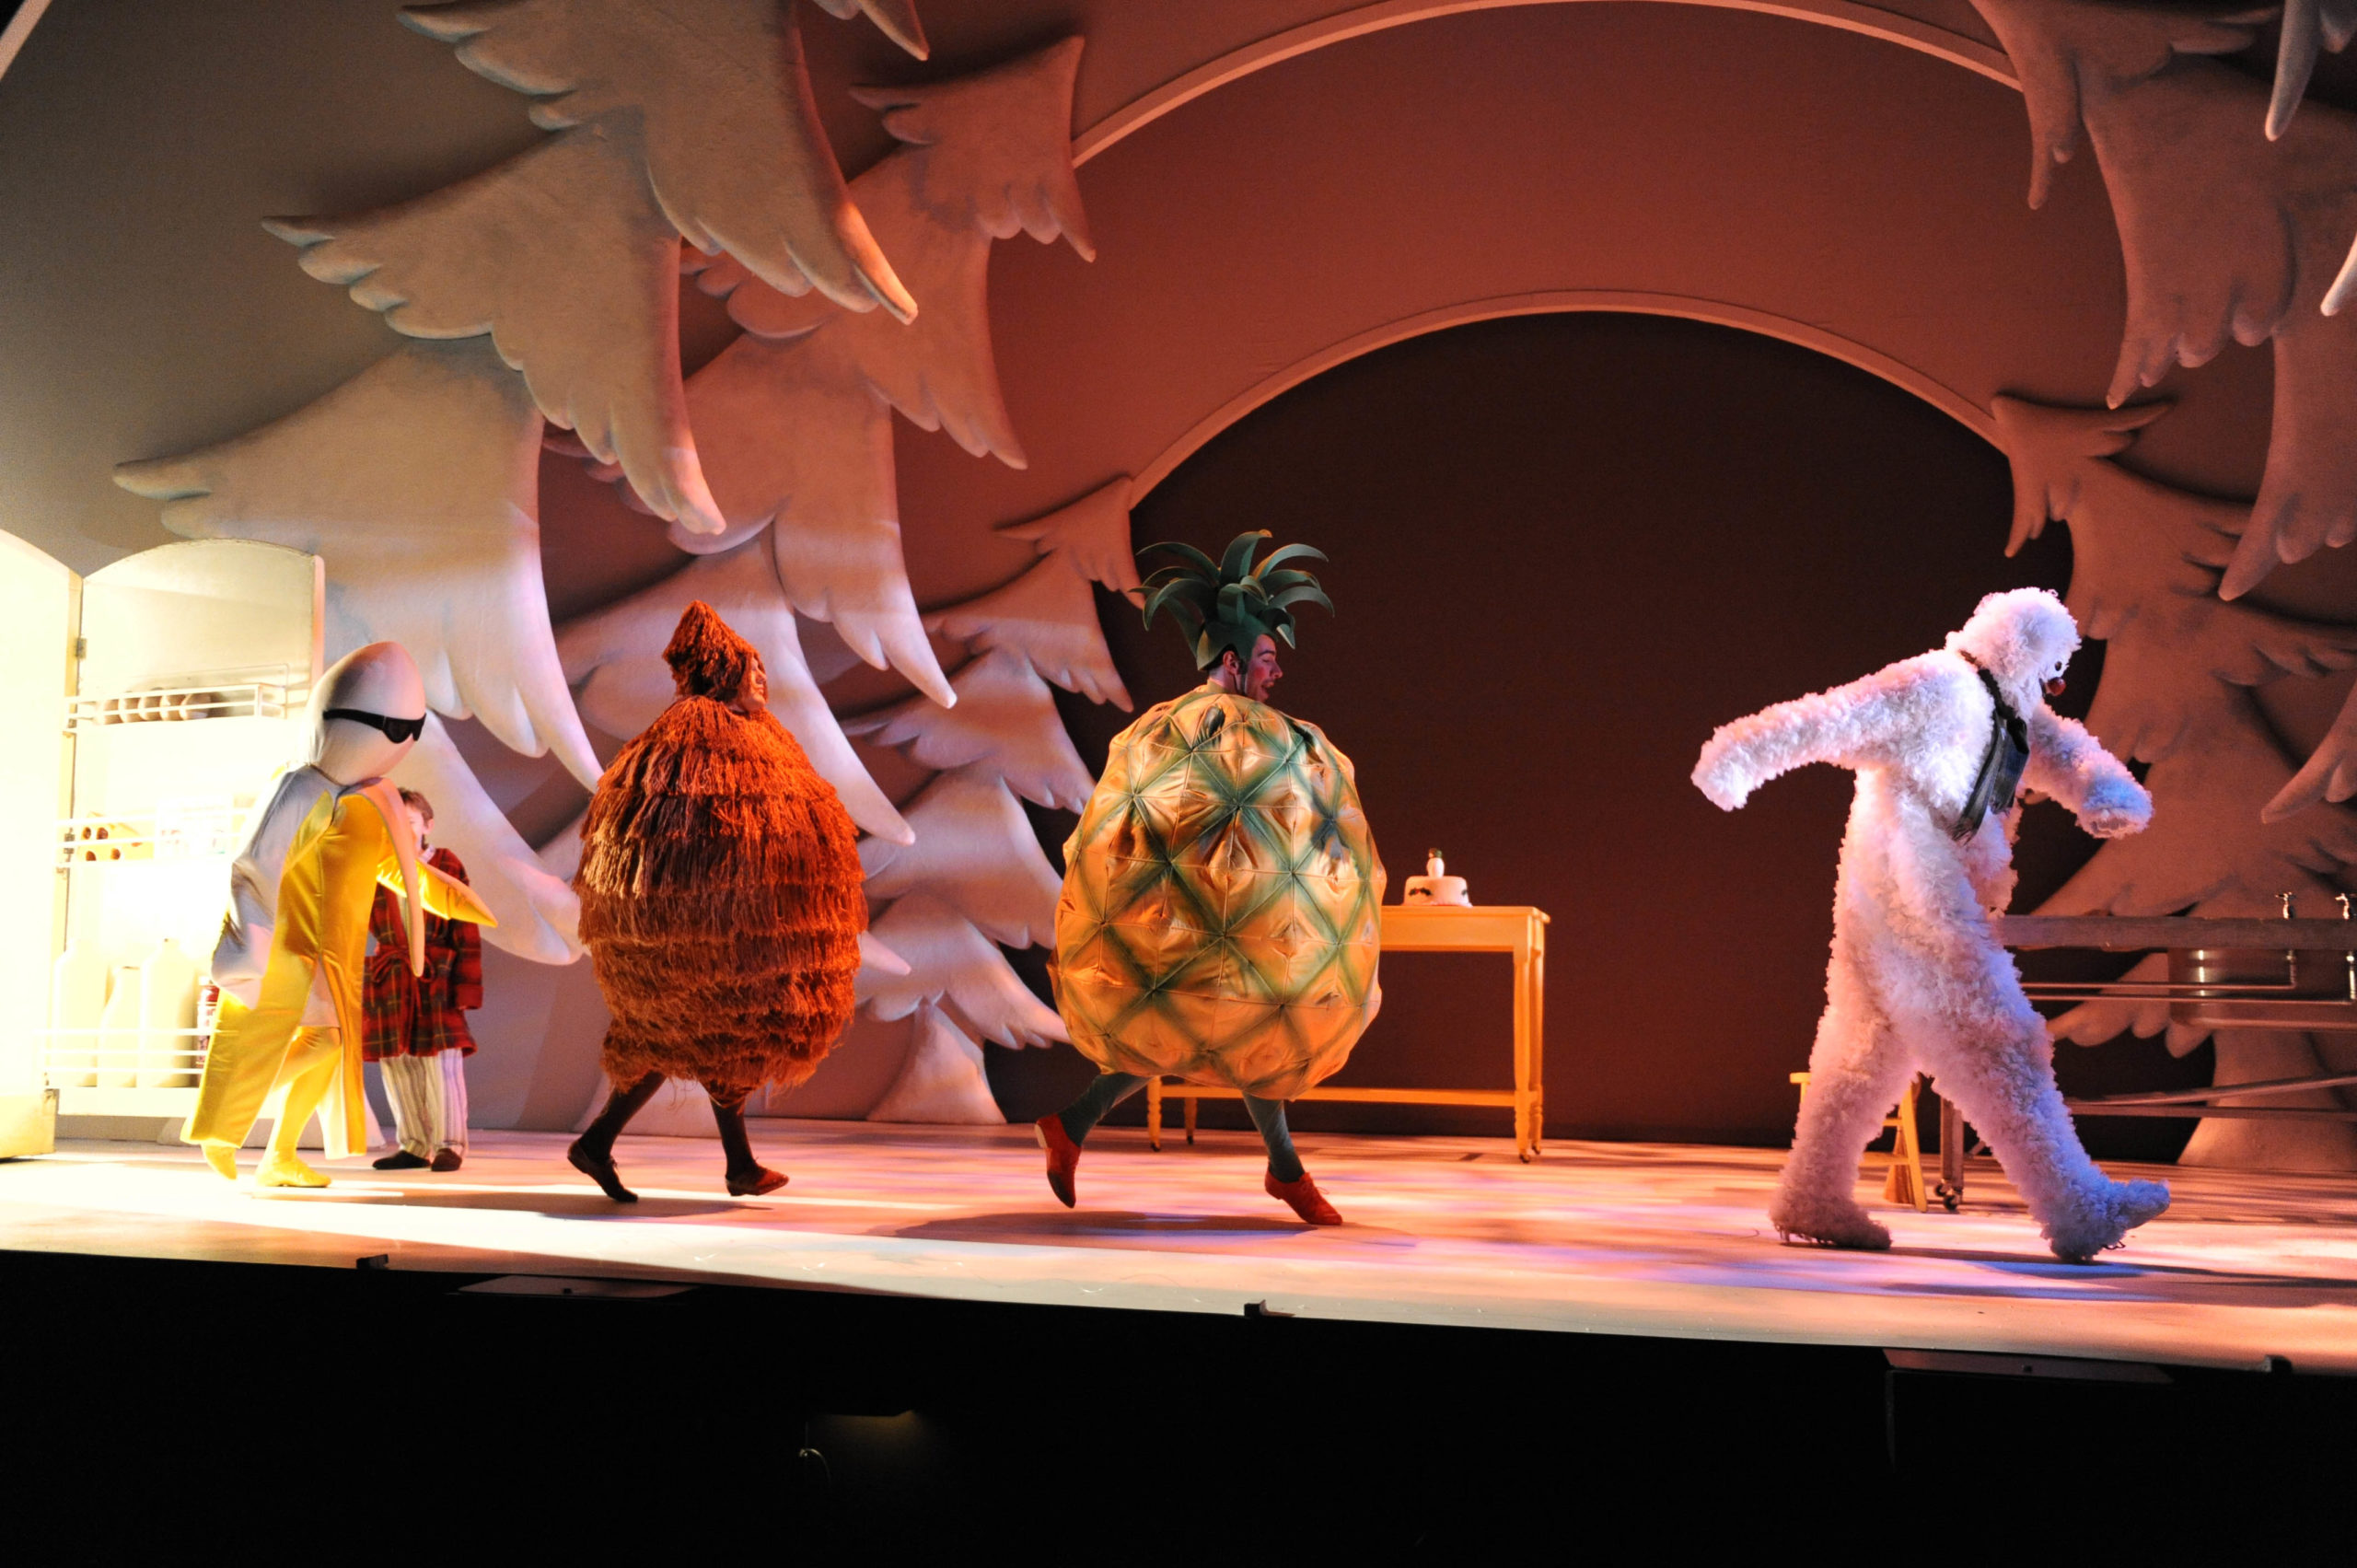 Pineapple, Coconut and banana dancing with The Snowman